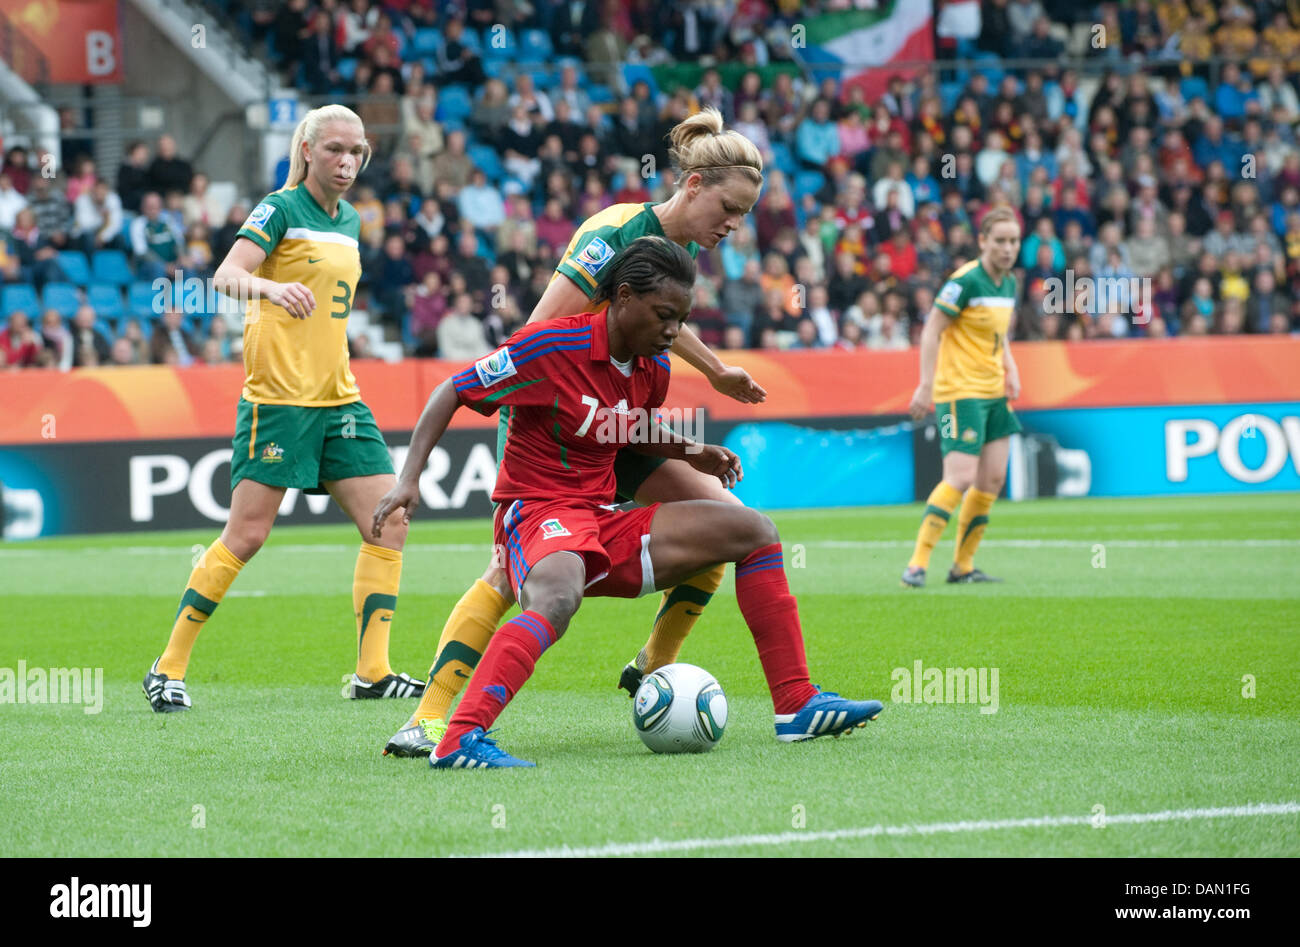 Lauren Colthorpe (C back) of Australia and Diala (C front) of Equatorial Guinea fight for the ball during the Group D match Australia against Equatorial Guinea of FIFA Women's World Cup soccer tournament at the FIFA Women's World Cup Stadium in Bochum, Germany, 03 July 2011. Australia won the match with 3-2. Foto: Foto: Bernd Thissen dpa/lnw Stock Photo